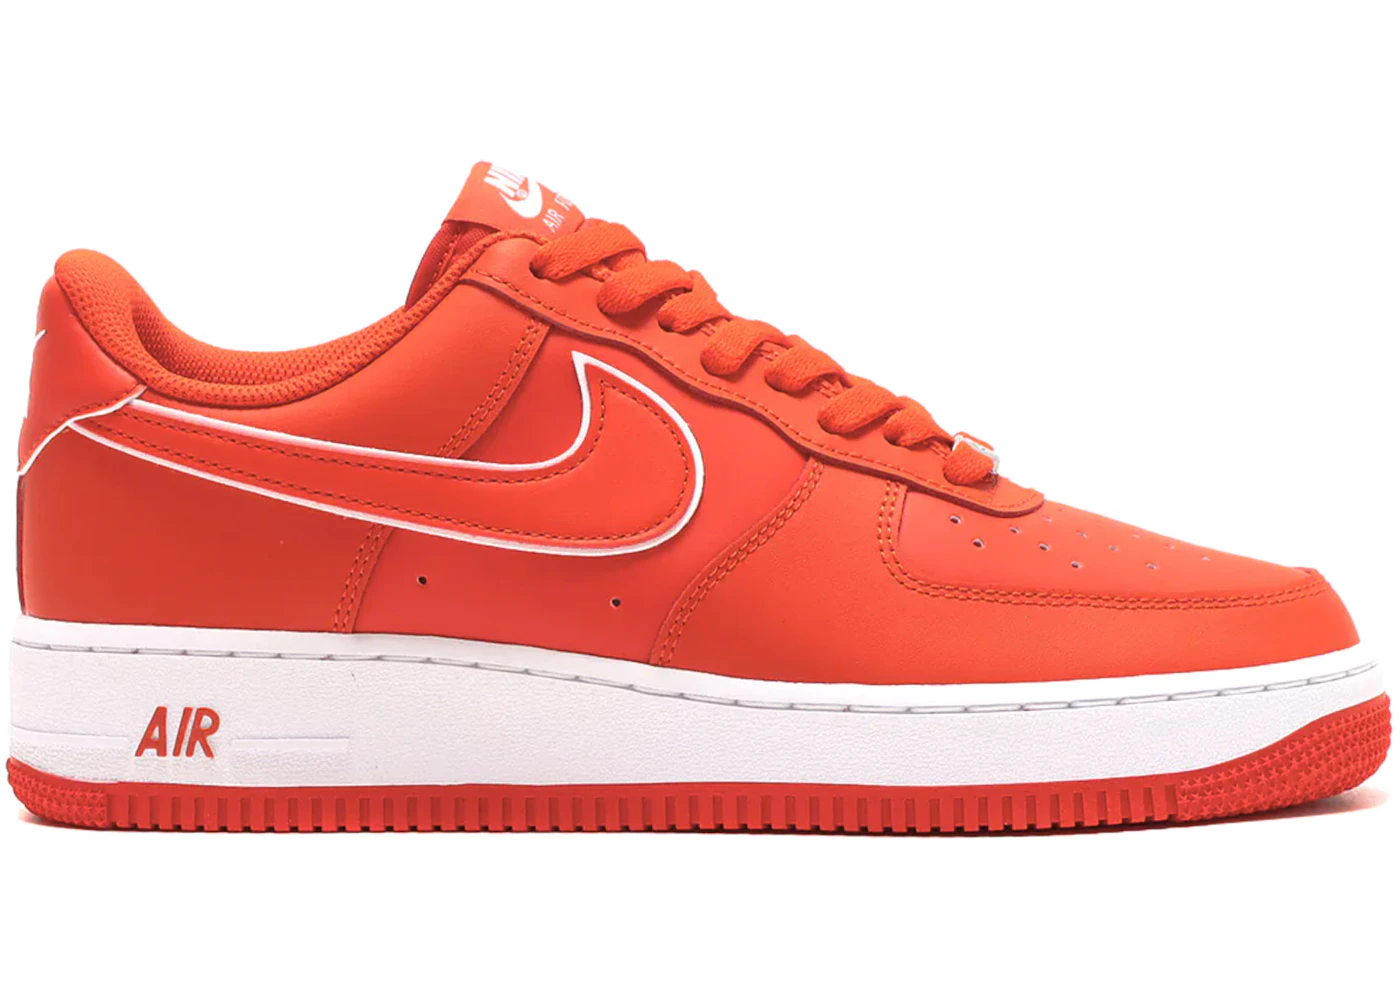 Nike Air Force 1 Low 07 Picante Red White - DV0788-600 - US